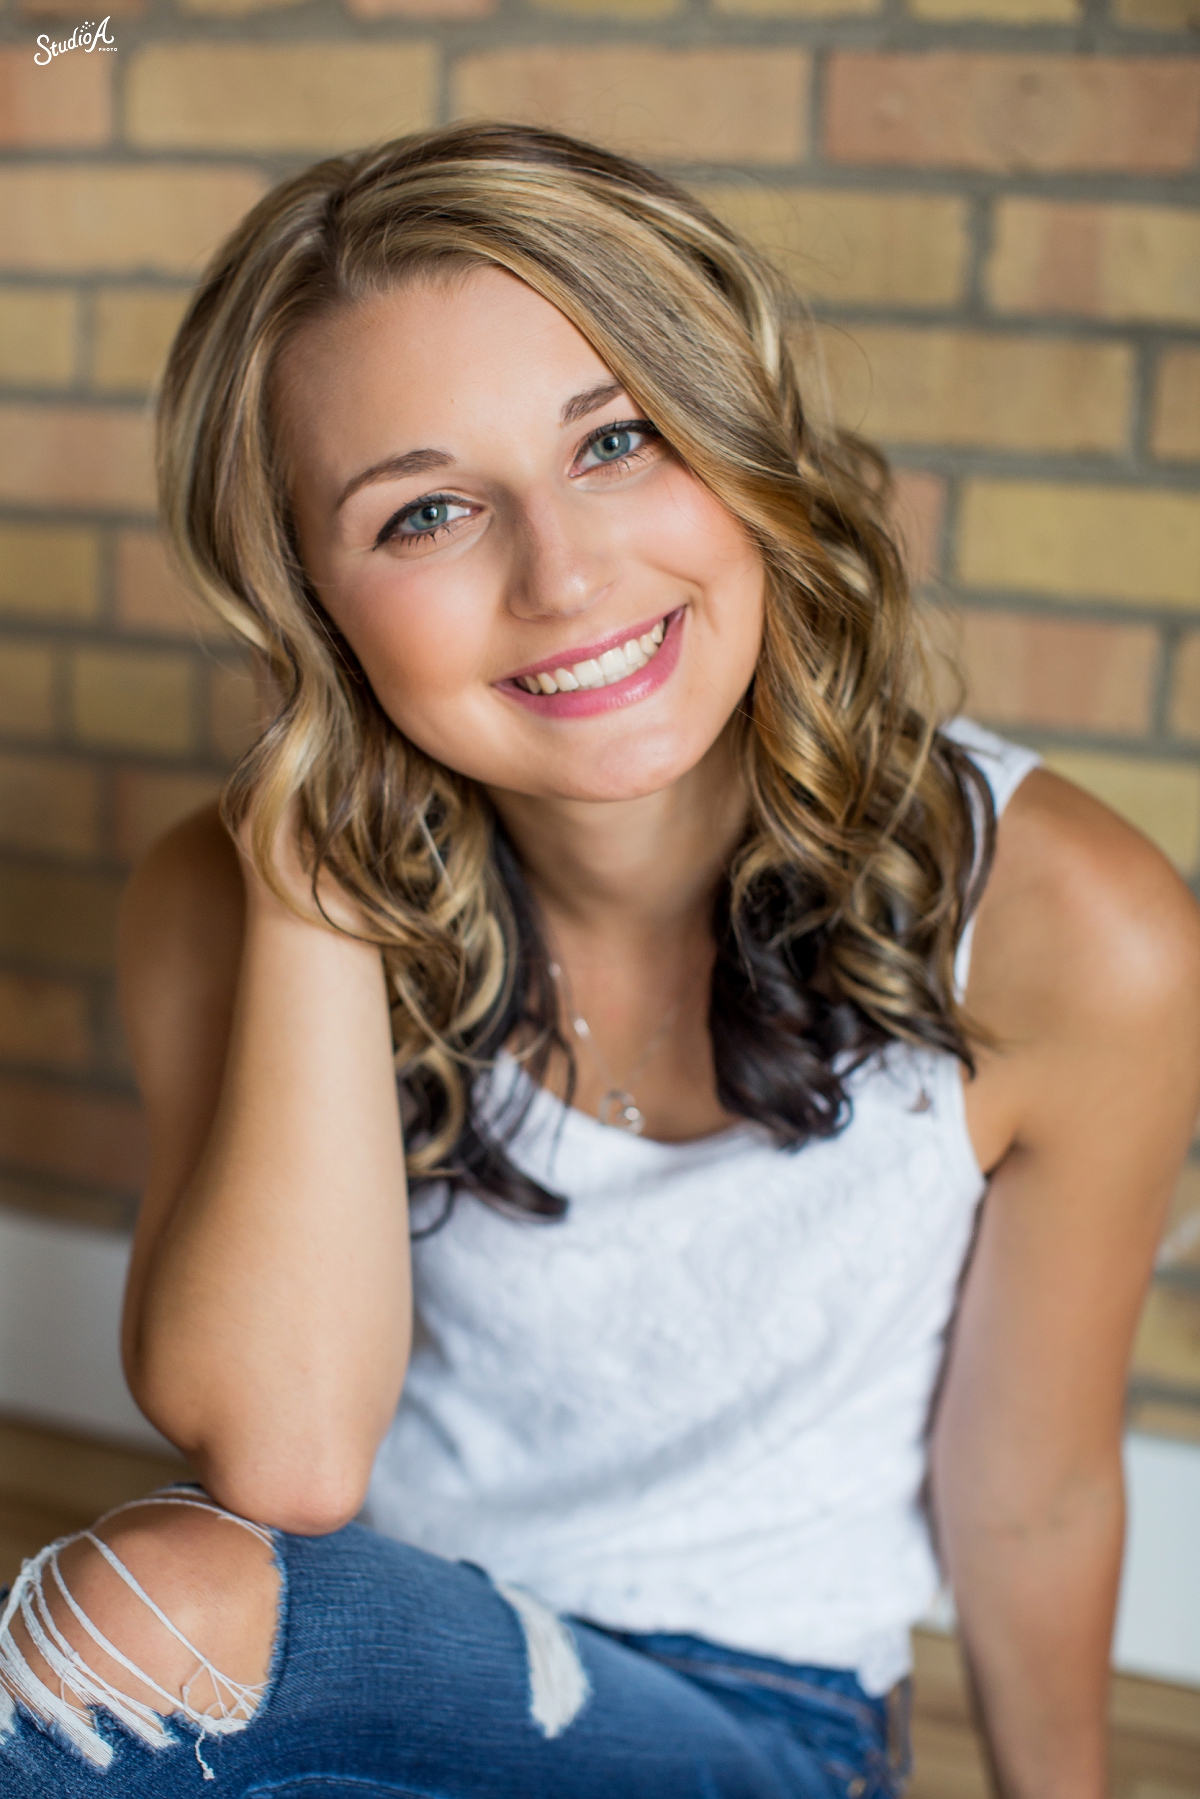 Downtown Fargo Studio Session for Seniors by Photographers Abby Anderson